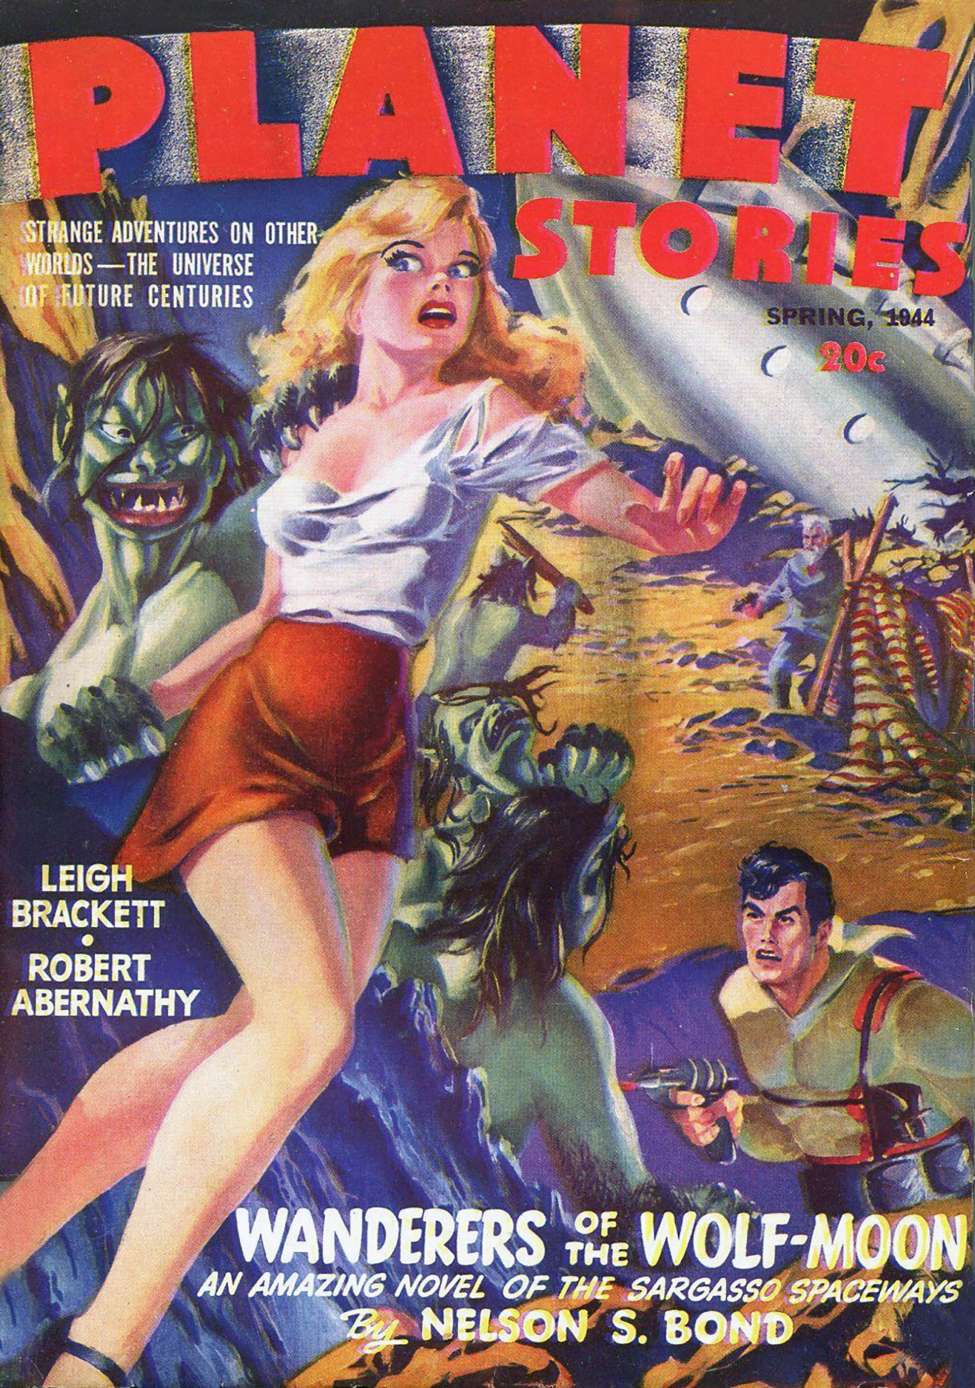 Book Cover For Planet Stories v2 6 - Wanderers of the Wolf-Moon - Nelson S. Bond